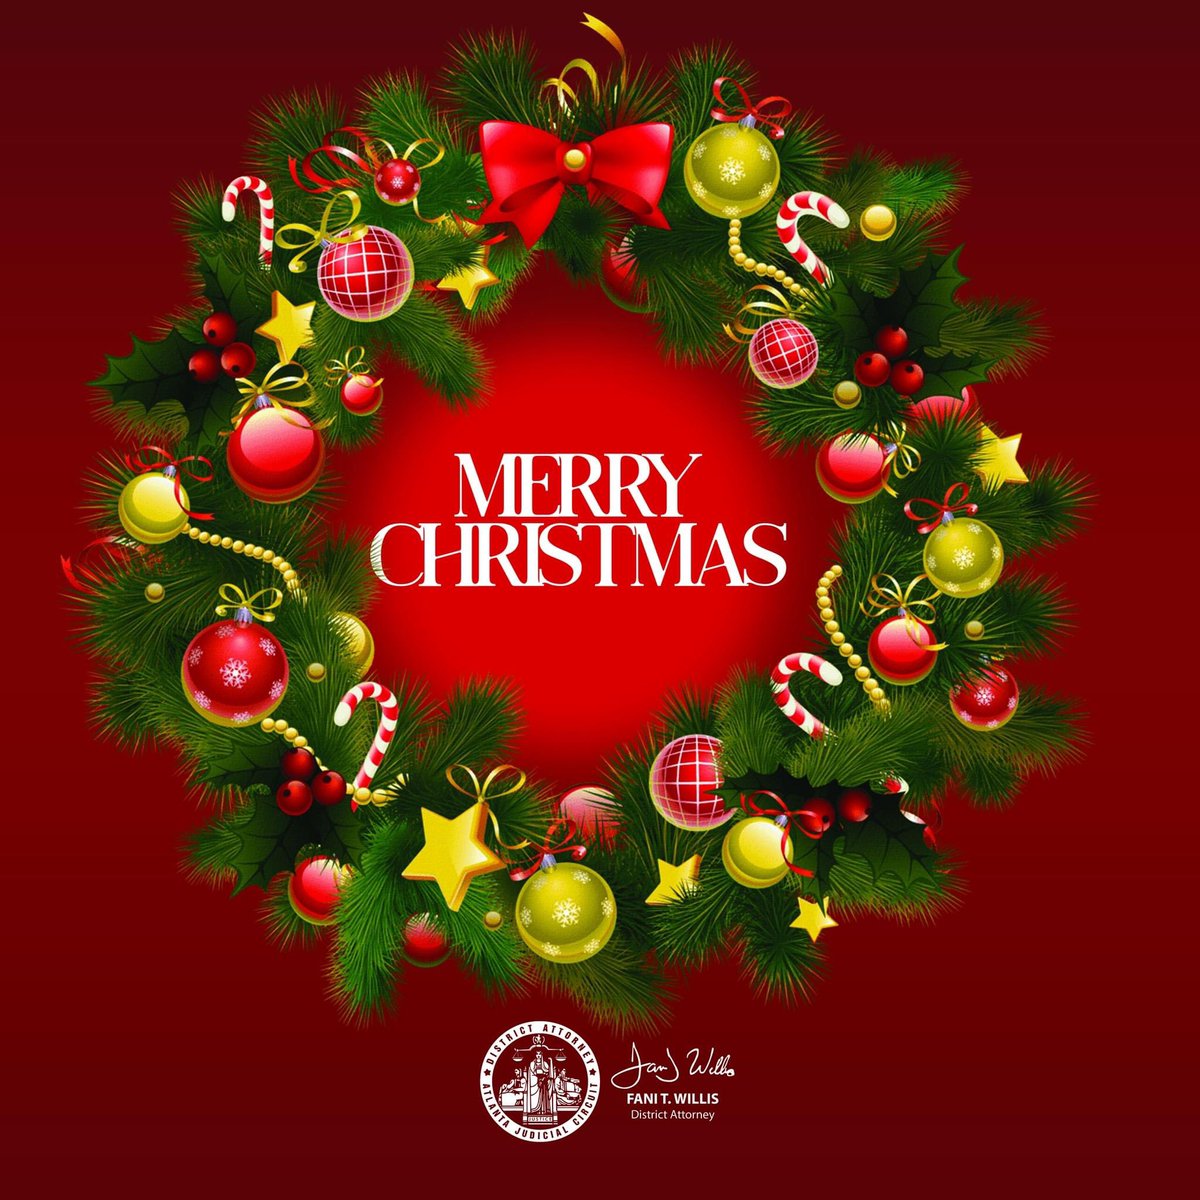 Wishing you a Merry Christmas from DA Fani T. Willis and the entire Fulton County District Attorney's Office! 🎄🎅 May this festive season bring joy, love, and moments of warmth to you and your loved ones. #MerryChristmas #HappyHolidays #FultonCounty #FultonCountyDA